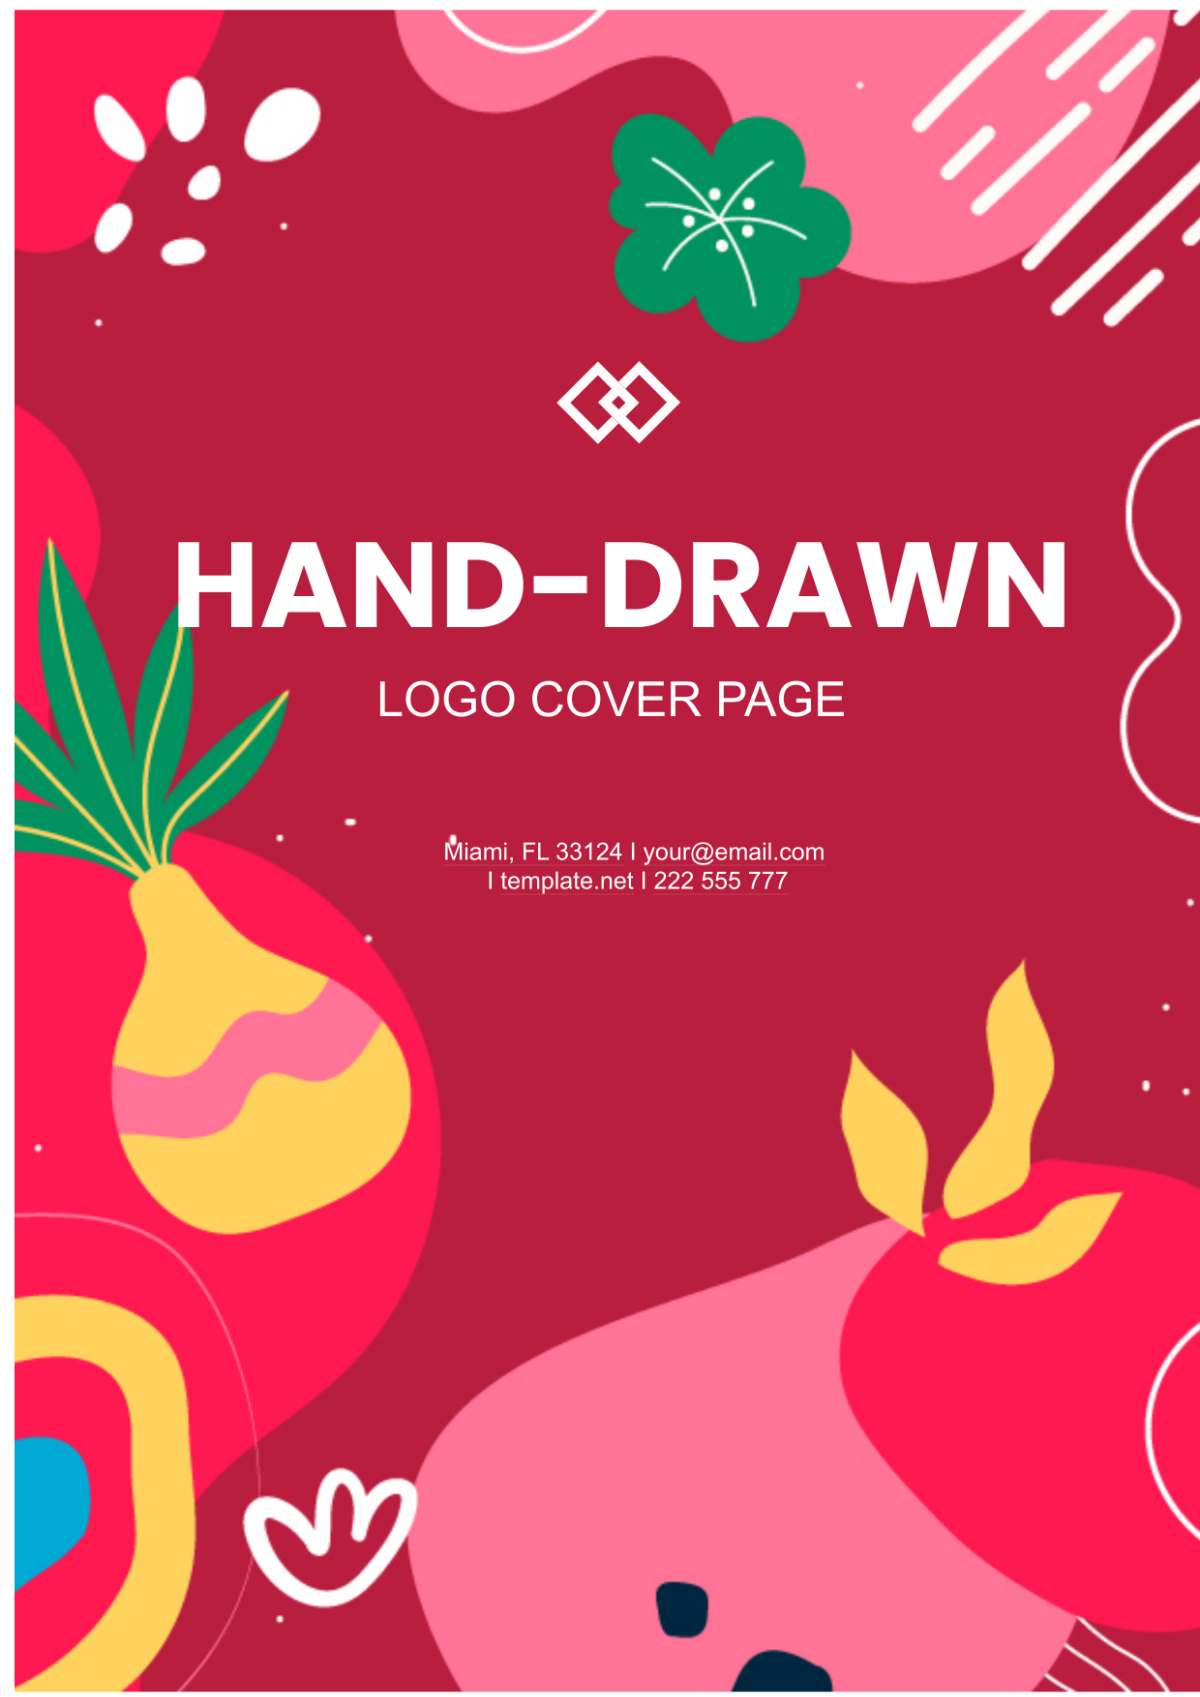 Free Hand-Drawn Logo Cover Page Template